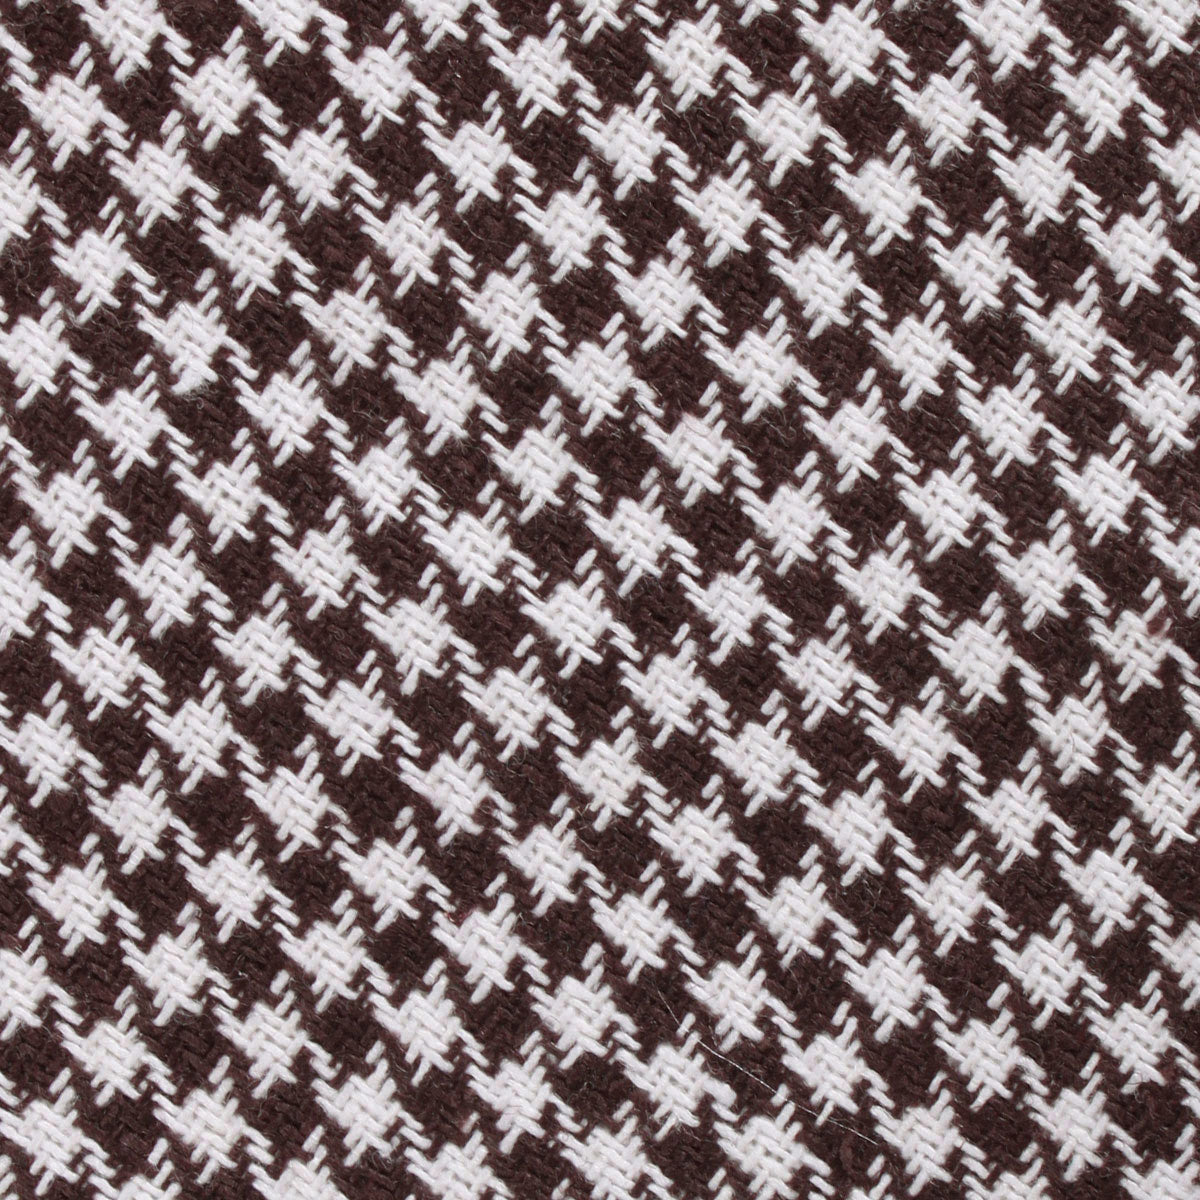 Cappuccino Houndstooth Brown Linen Fabric Mens Bow Tie